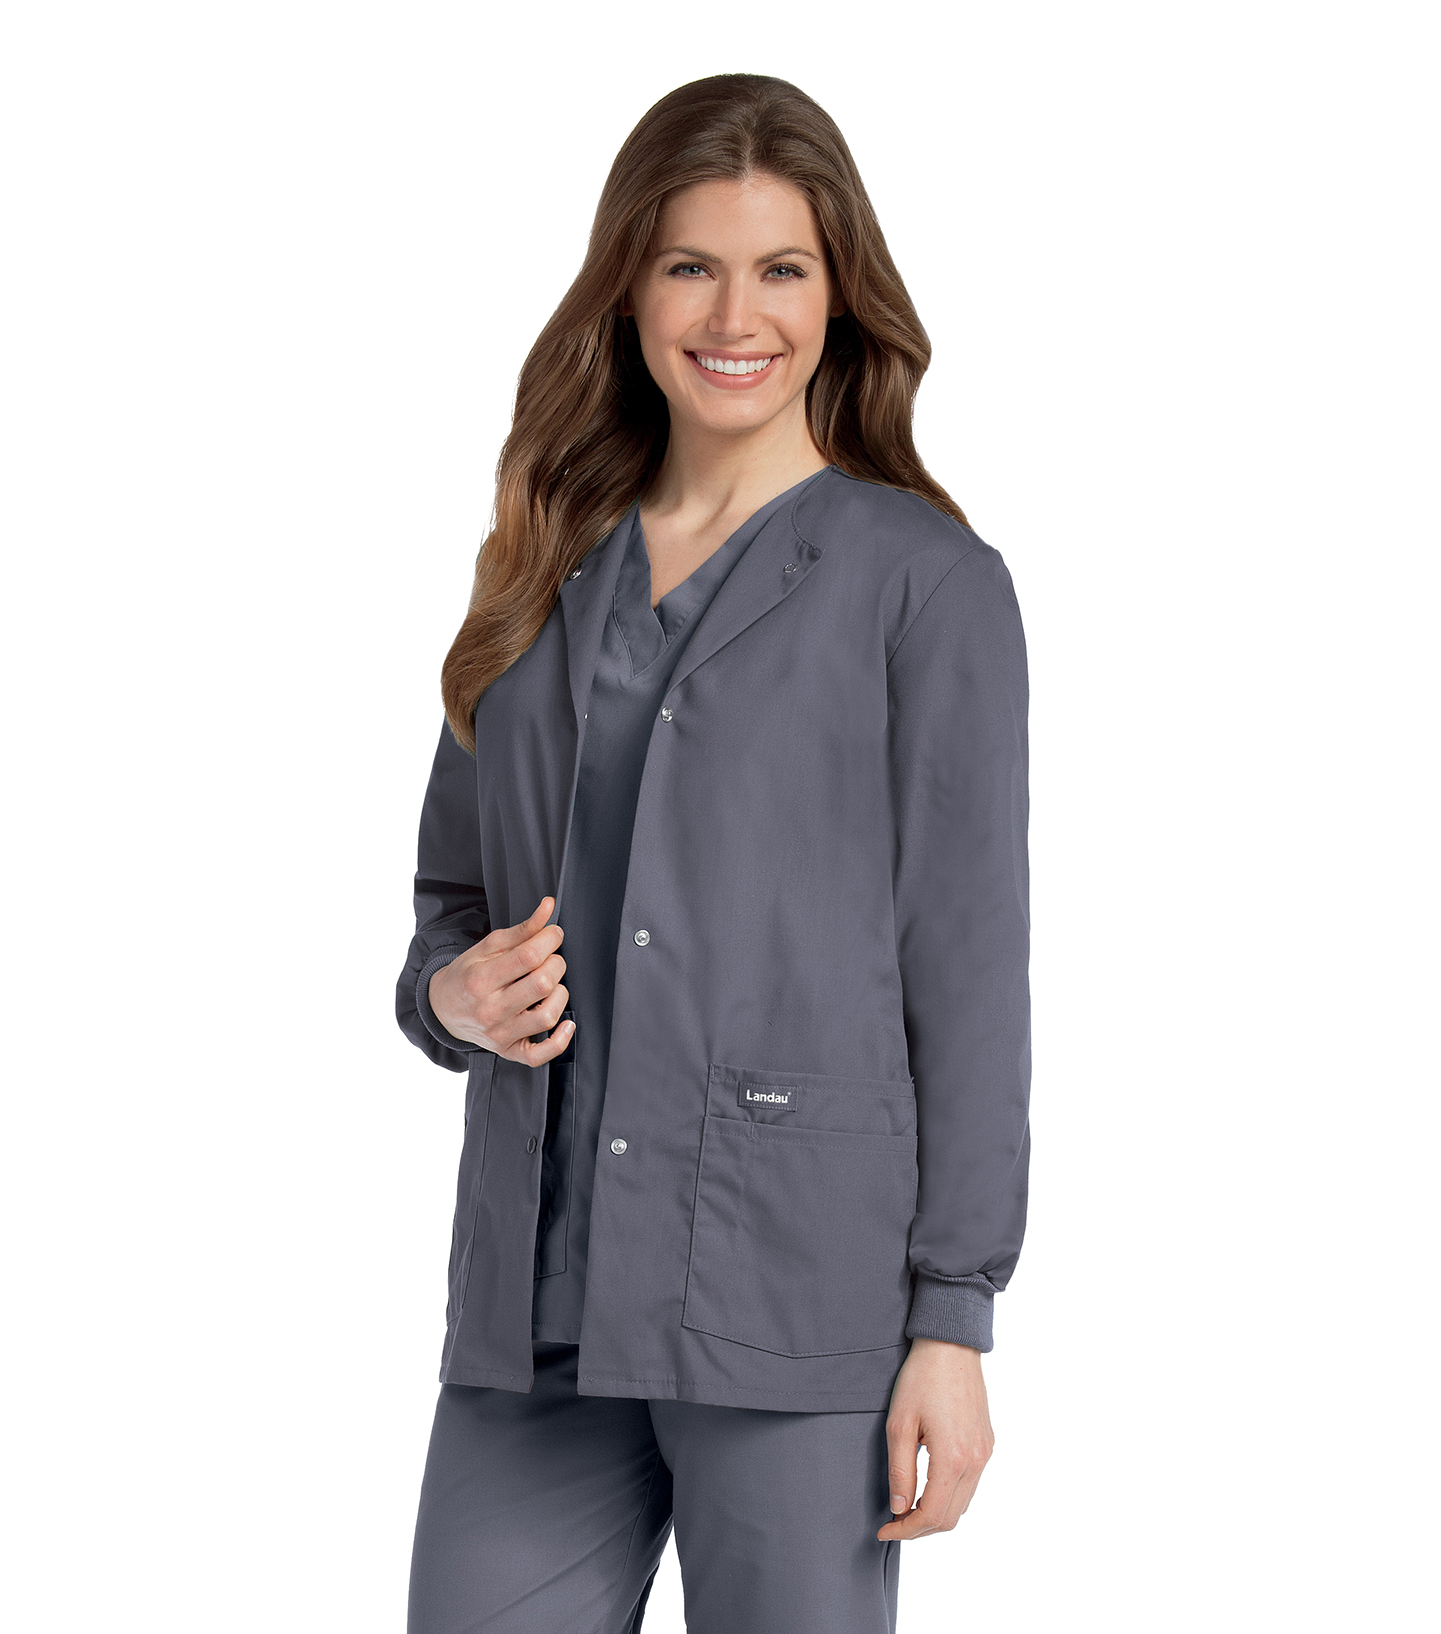 Landau Essentials Relaxed Fit 4-Pocket Snap-Front Scrub Jacket for Women 7525 - image 1 of 6